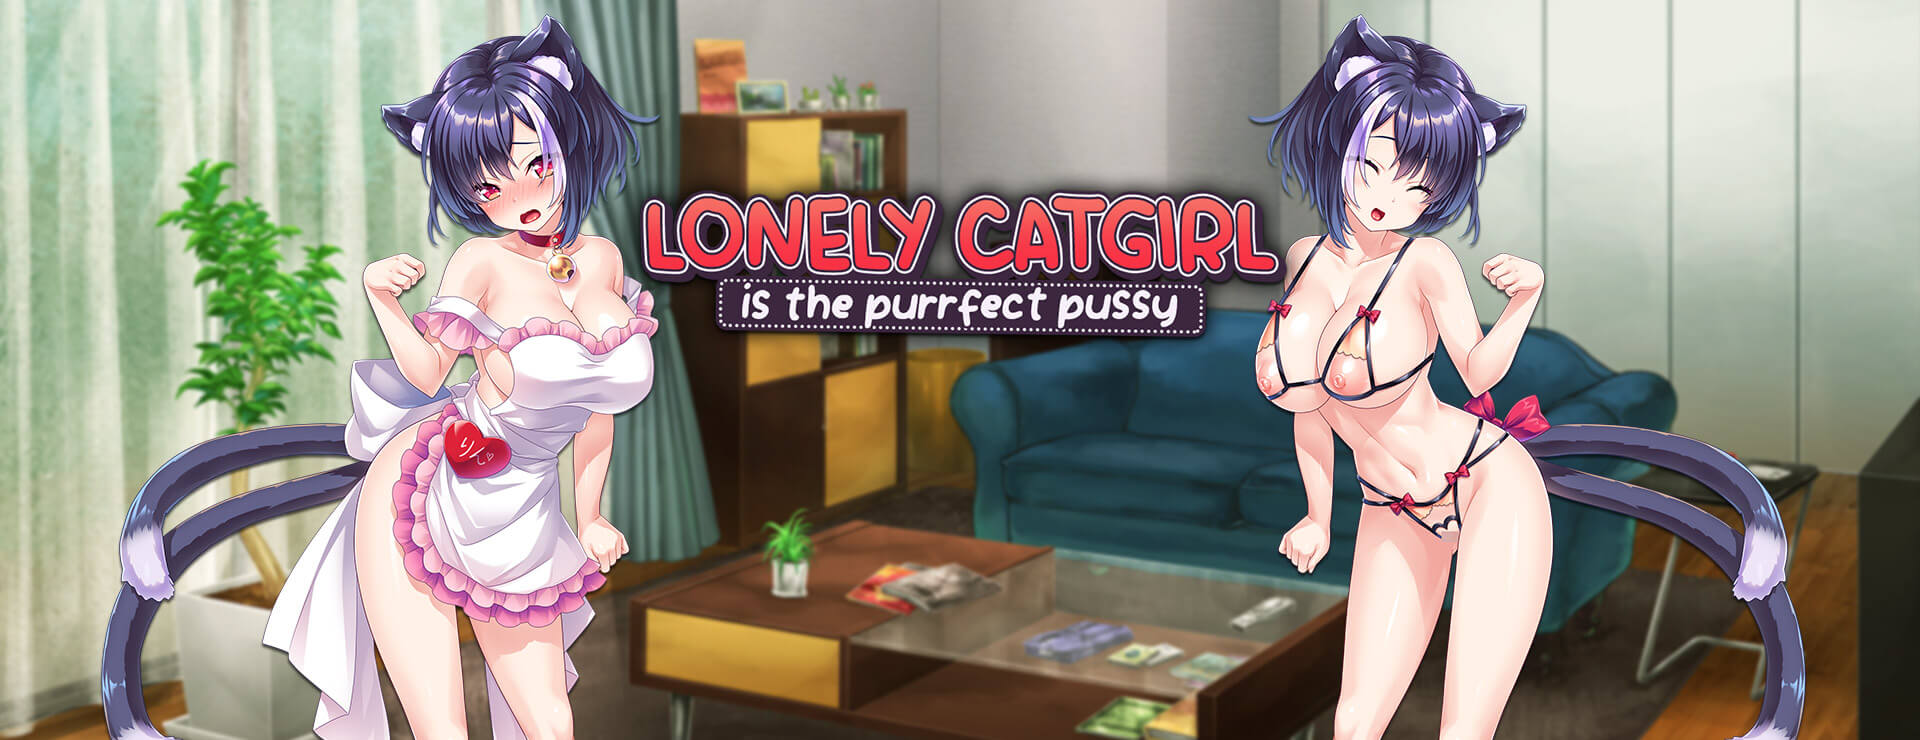 Lonely Catgirl is the Purrfect Pussy - Visual Novel Game